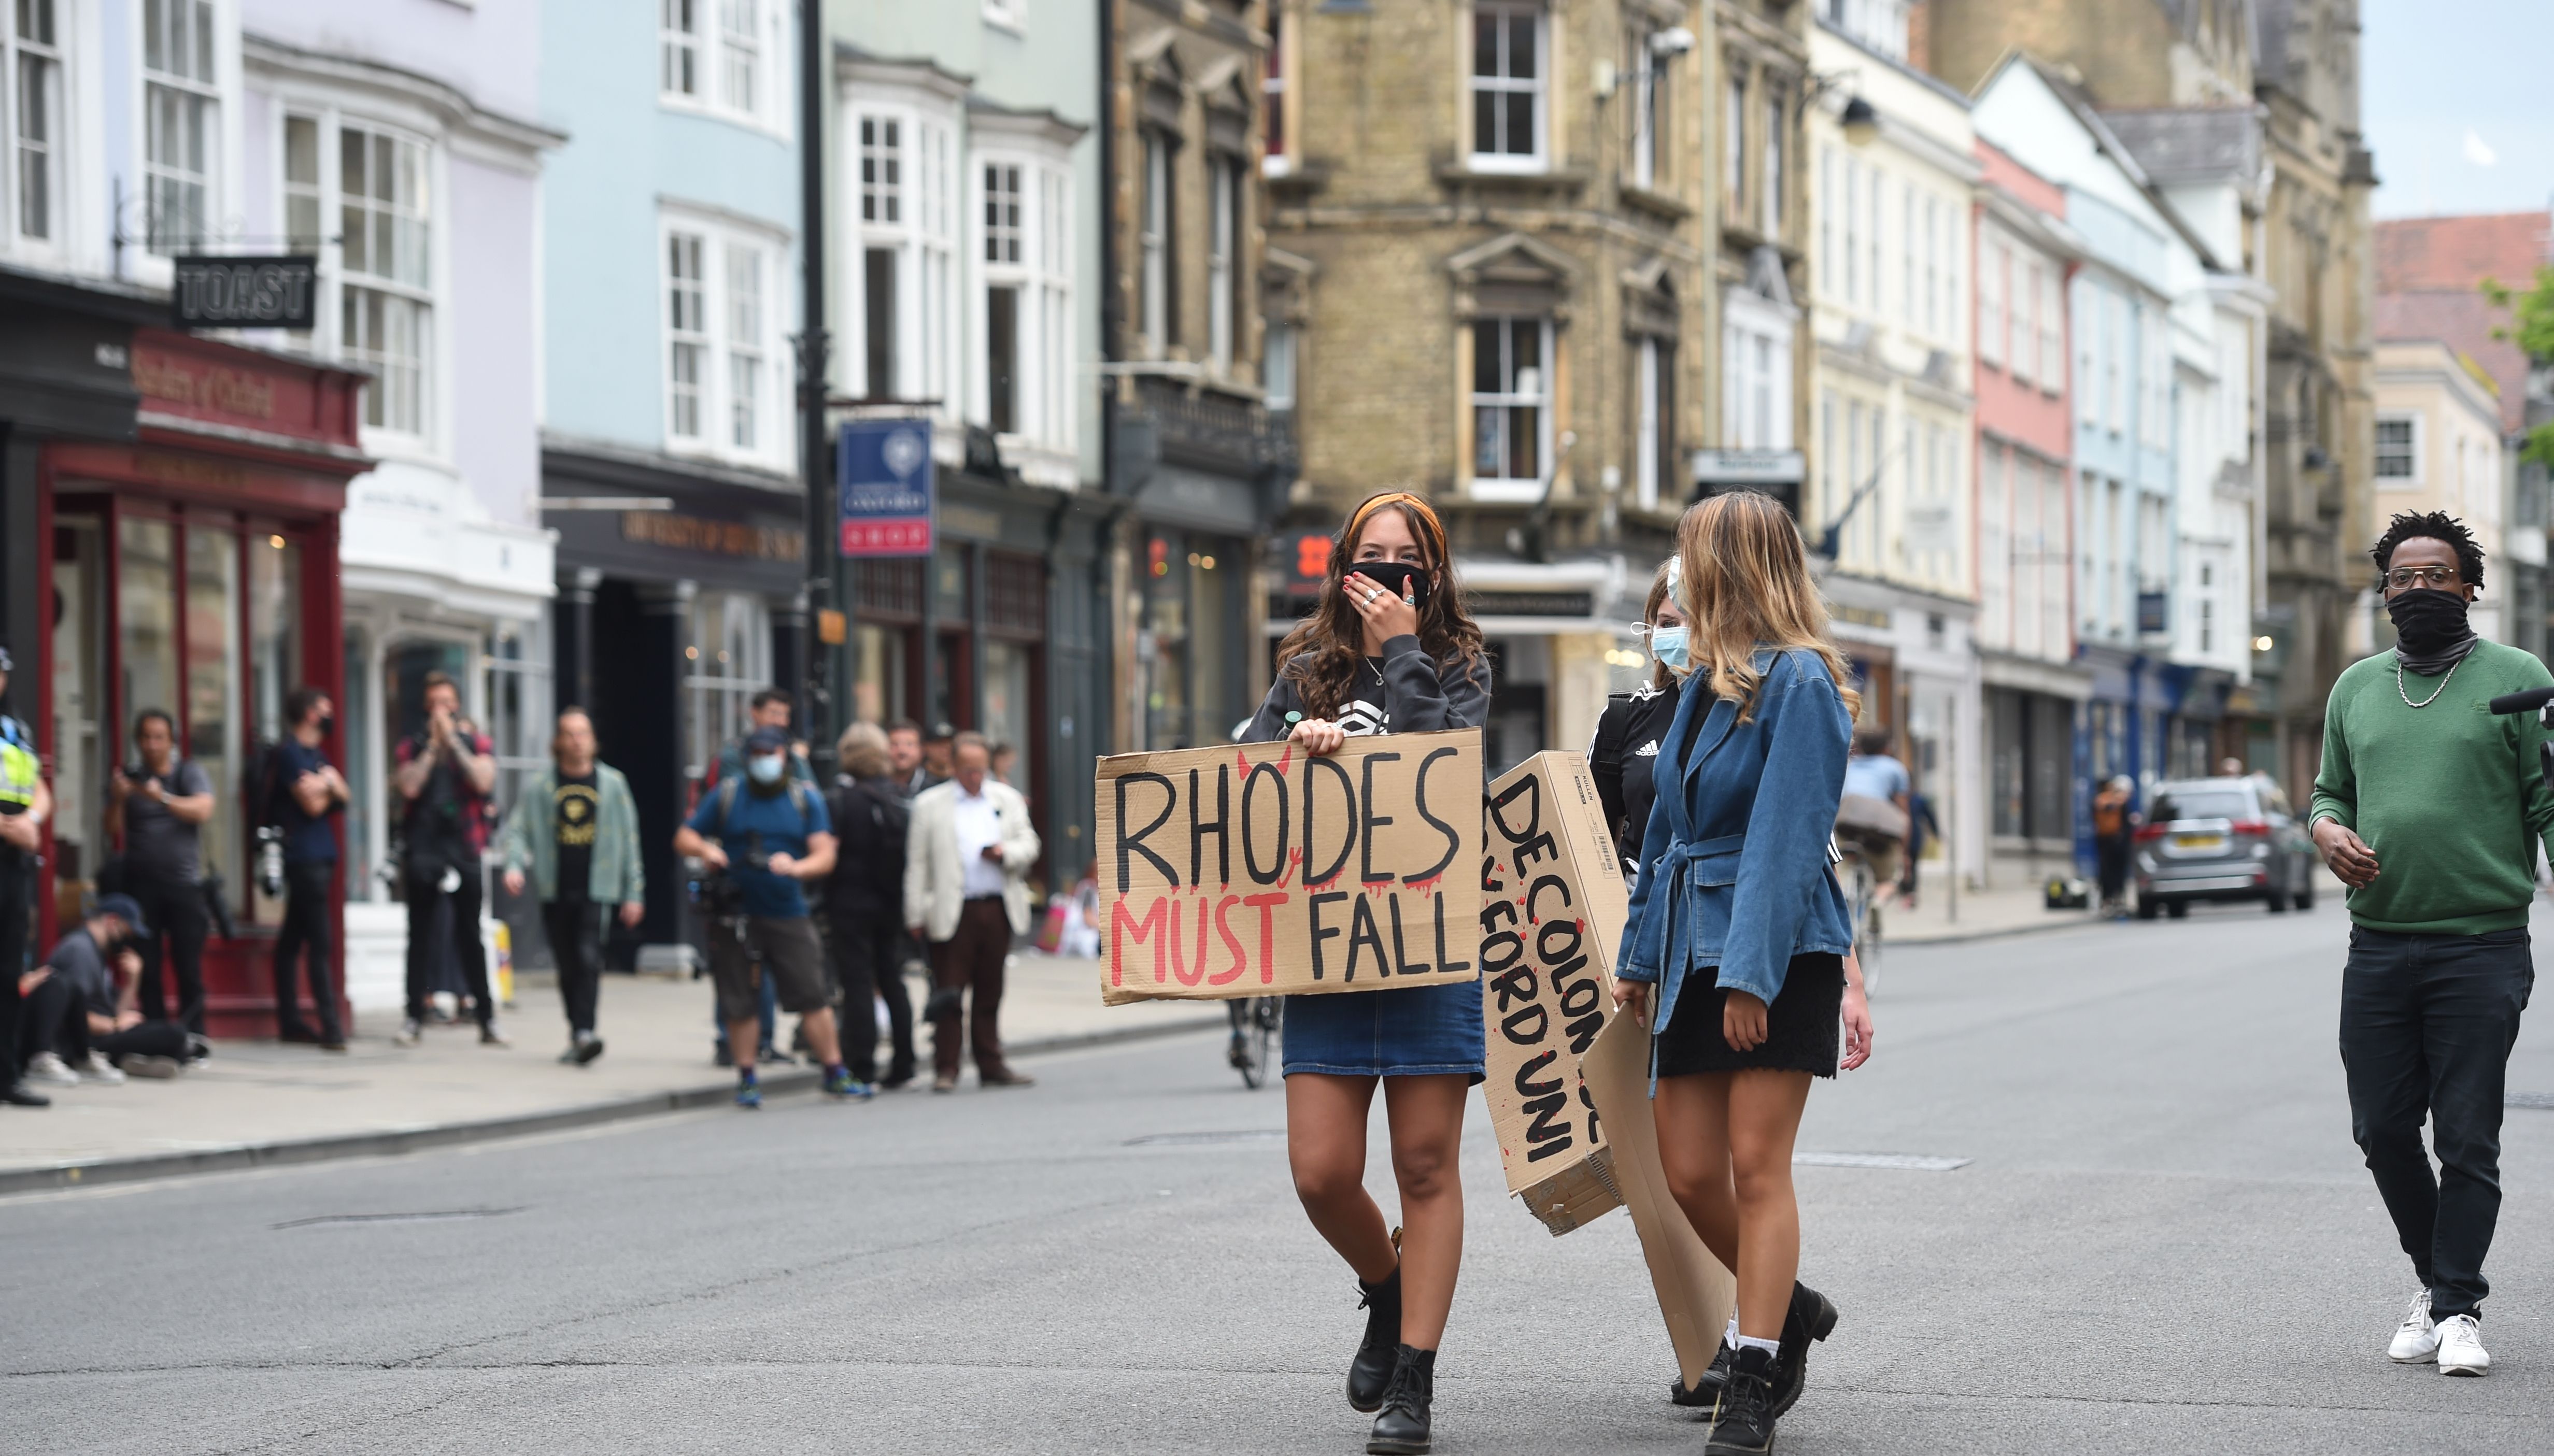 Protesters in Oxford, during a protest calling for the removal of the Cecil Rhodes statues from the Oriel college.